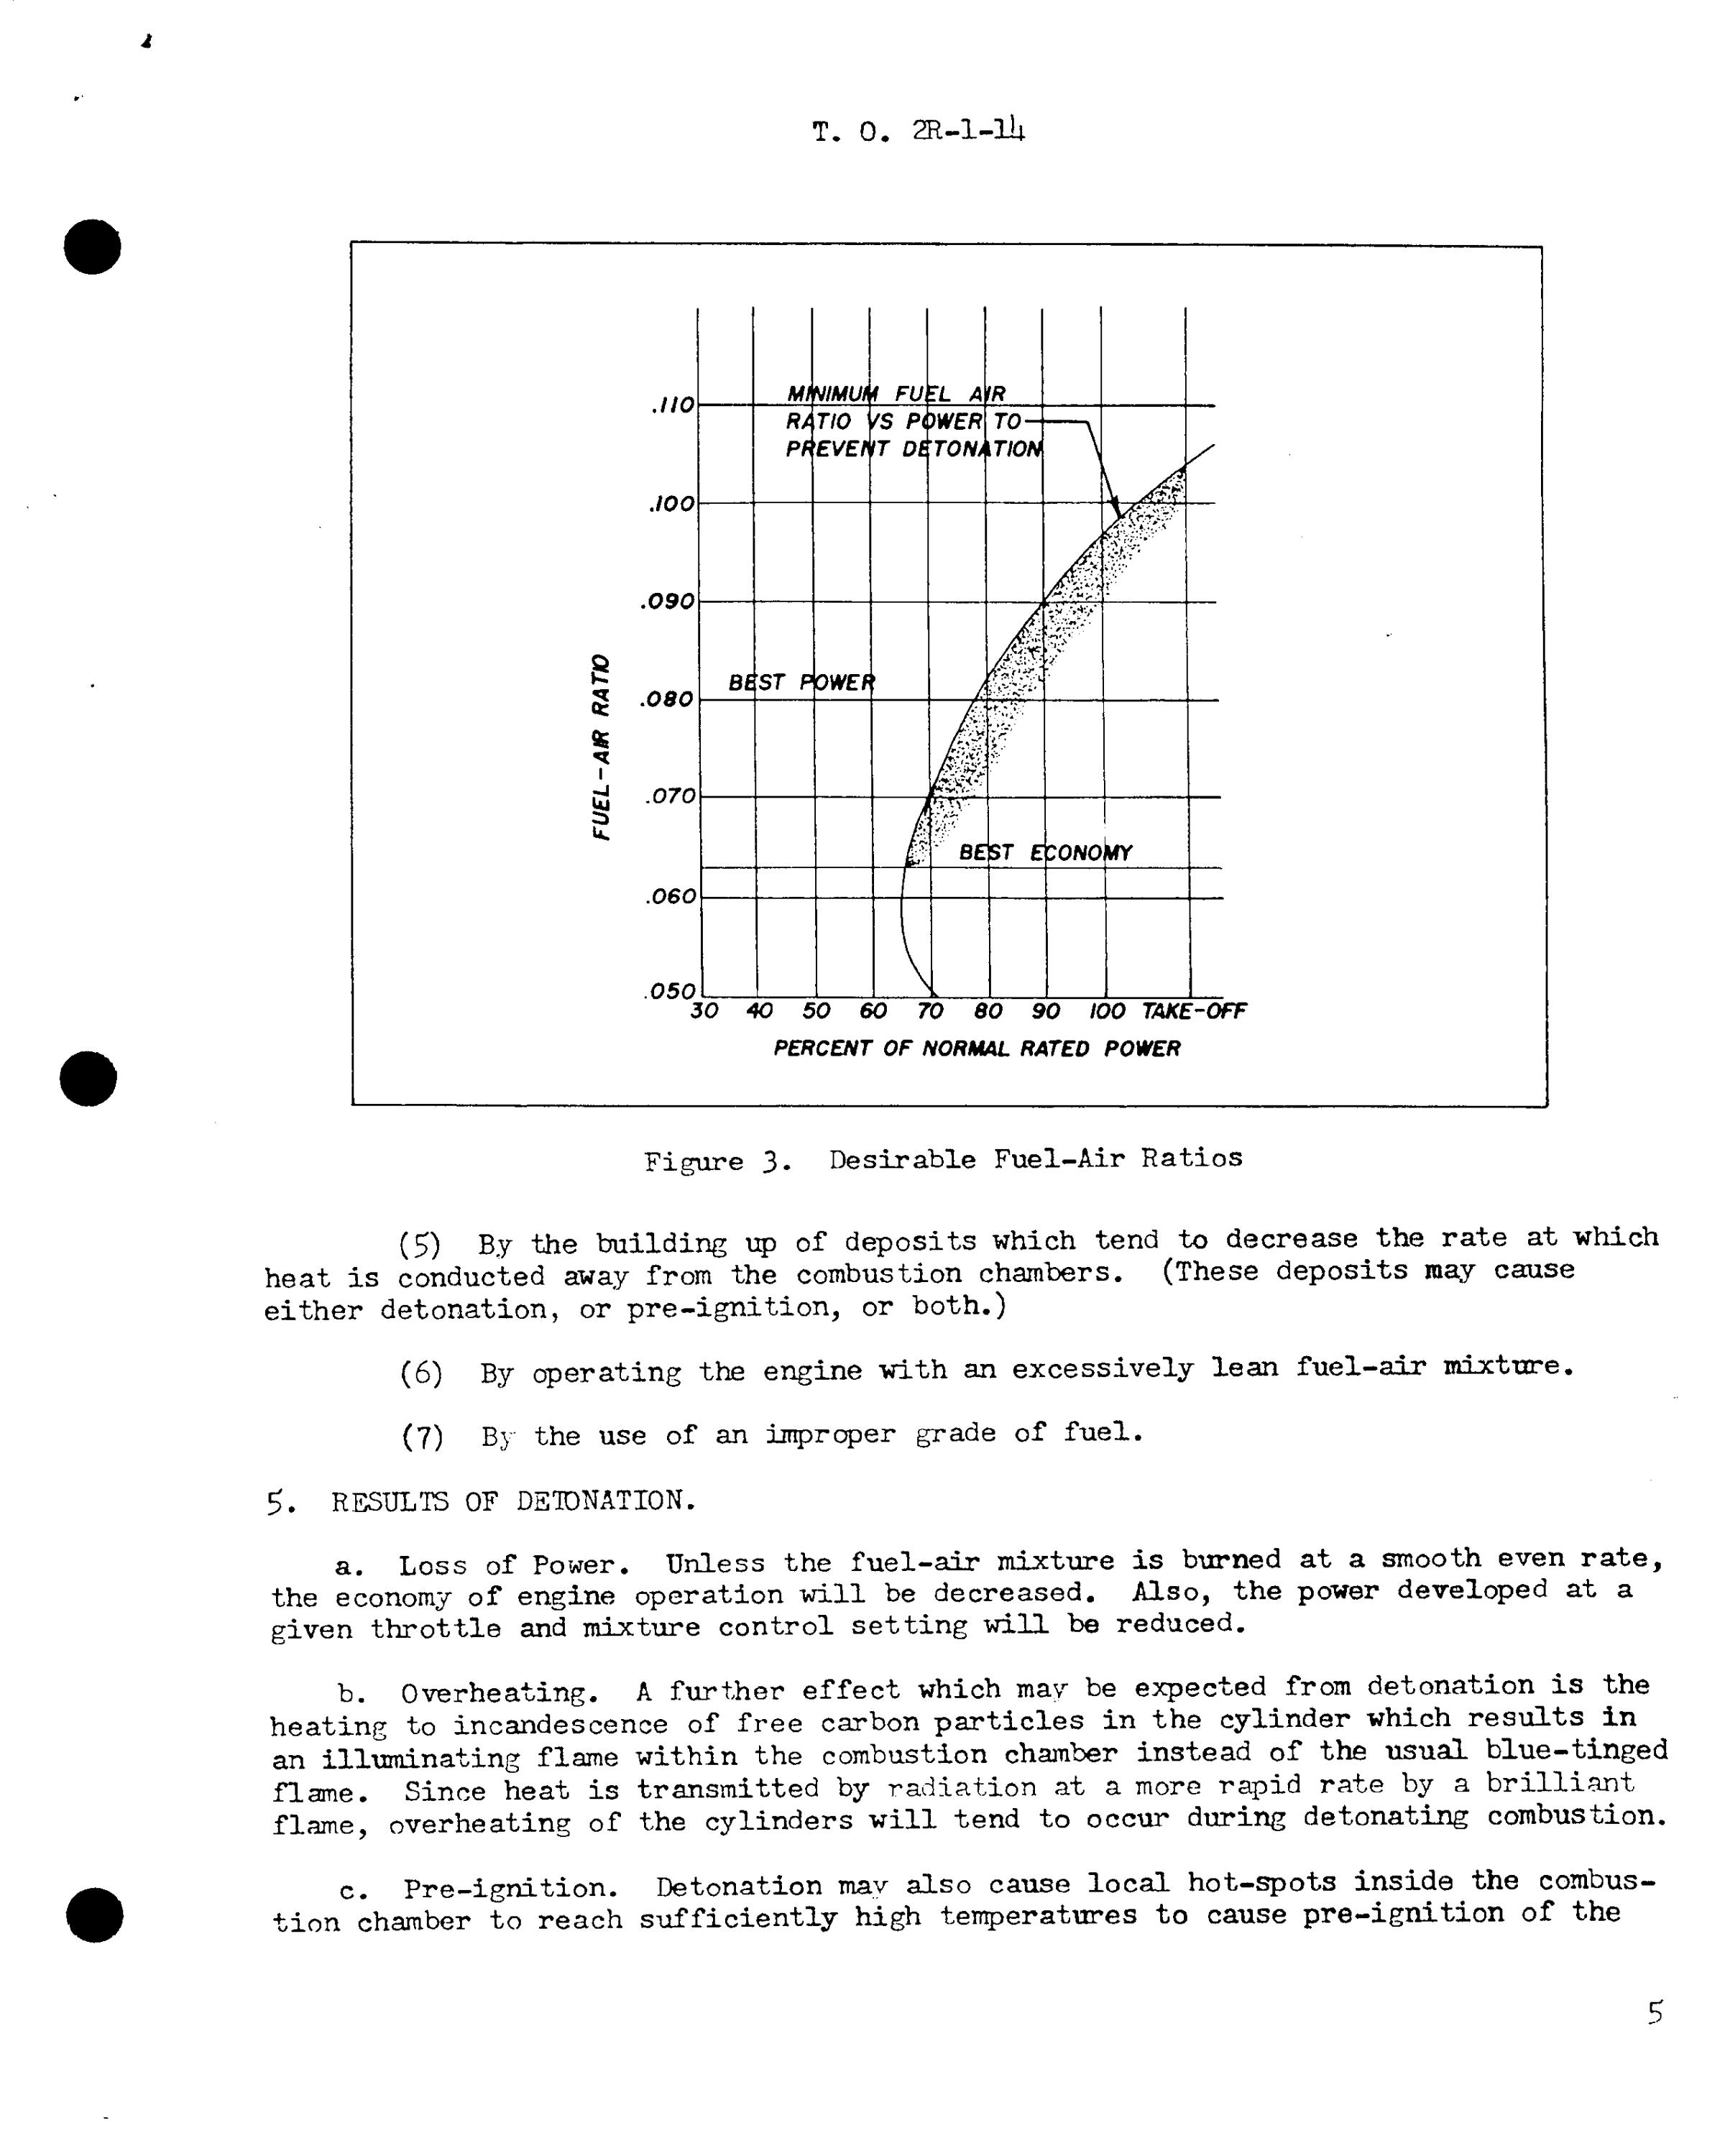 Sample page 5 from AirCorps Library document: Detonation in Aircraft Engines